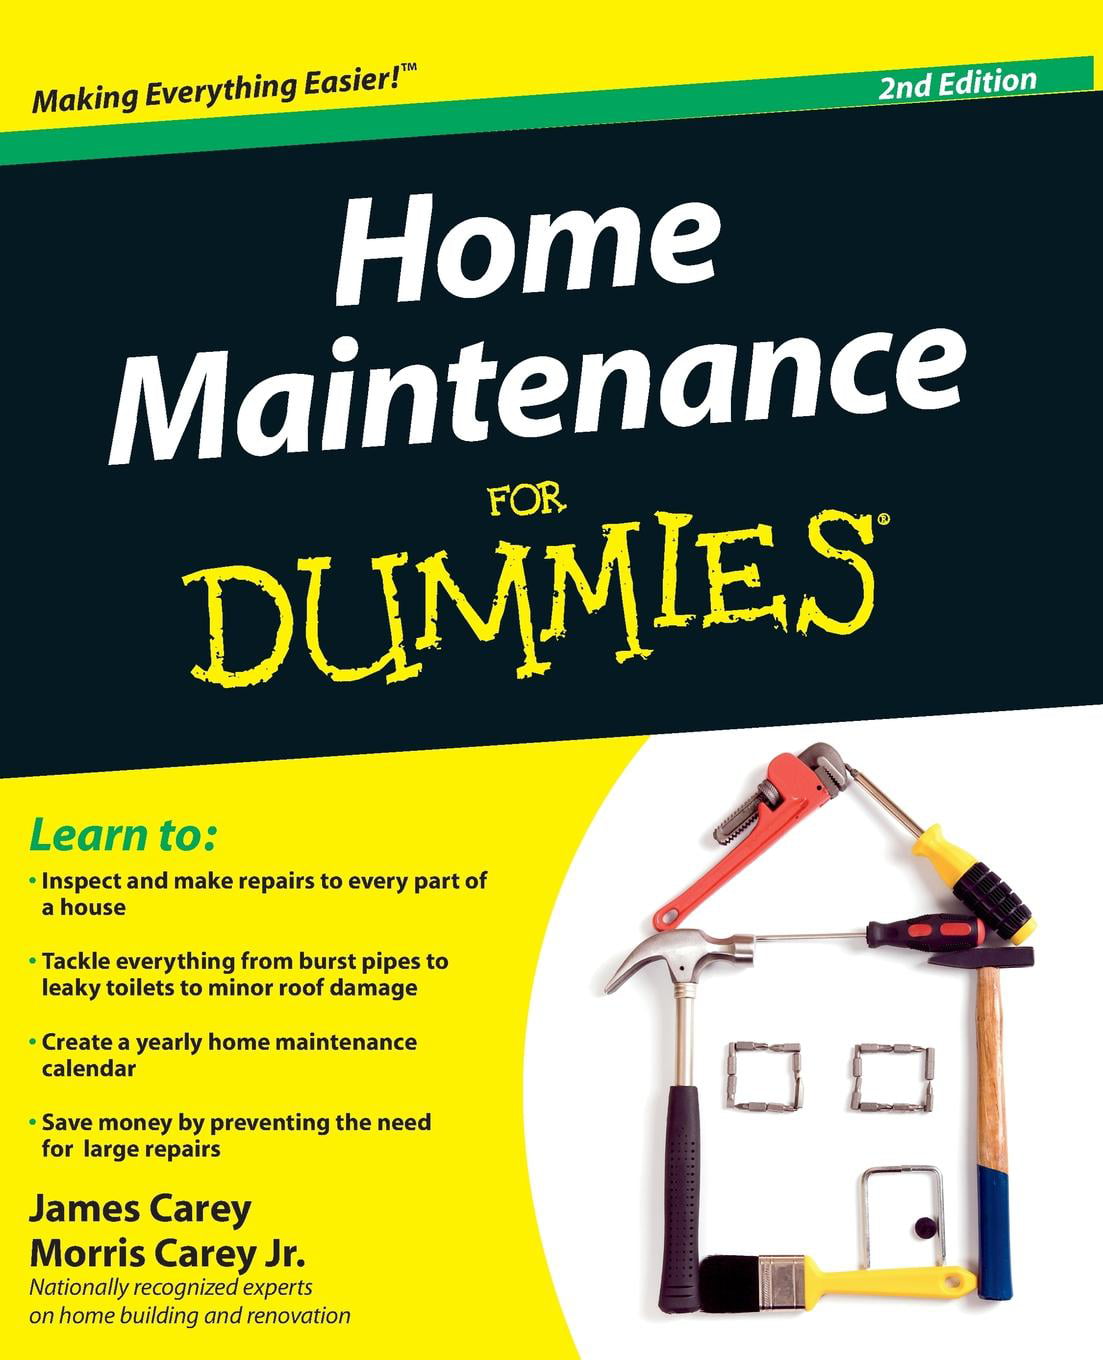 For Dummies: Home Maintenance for Dummies, 2nd Edition (Paperback